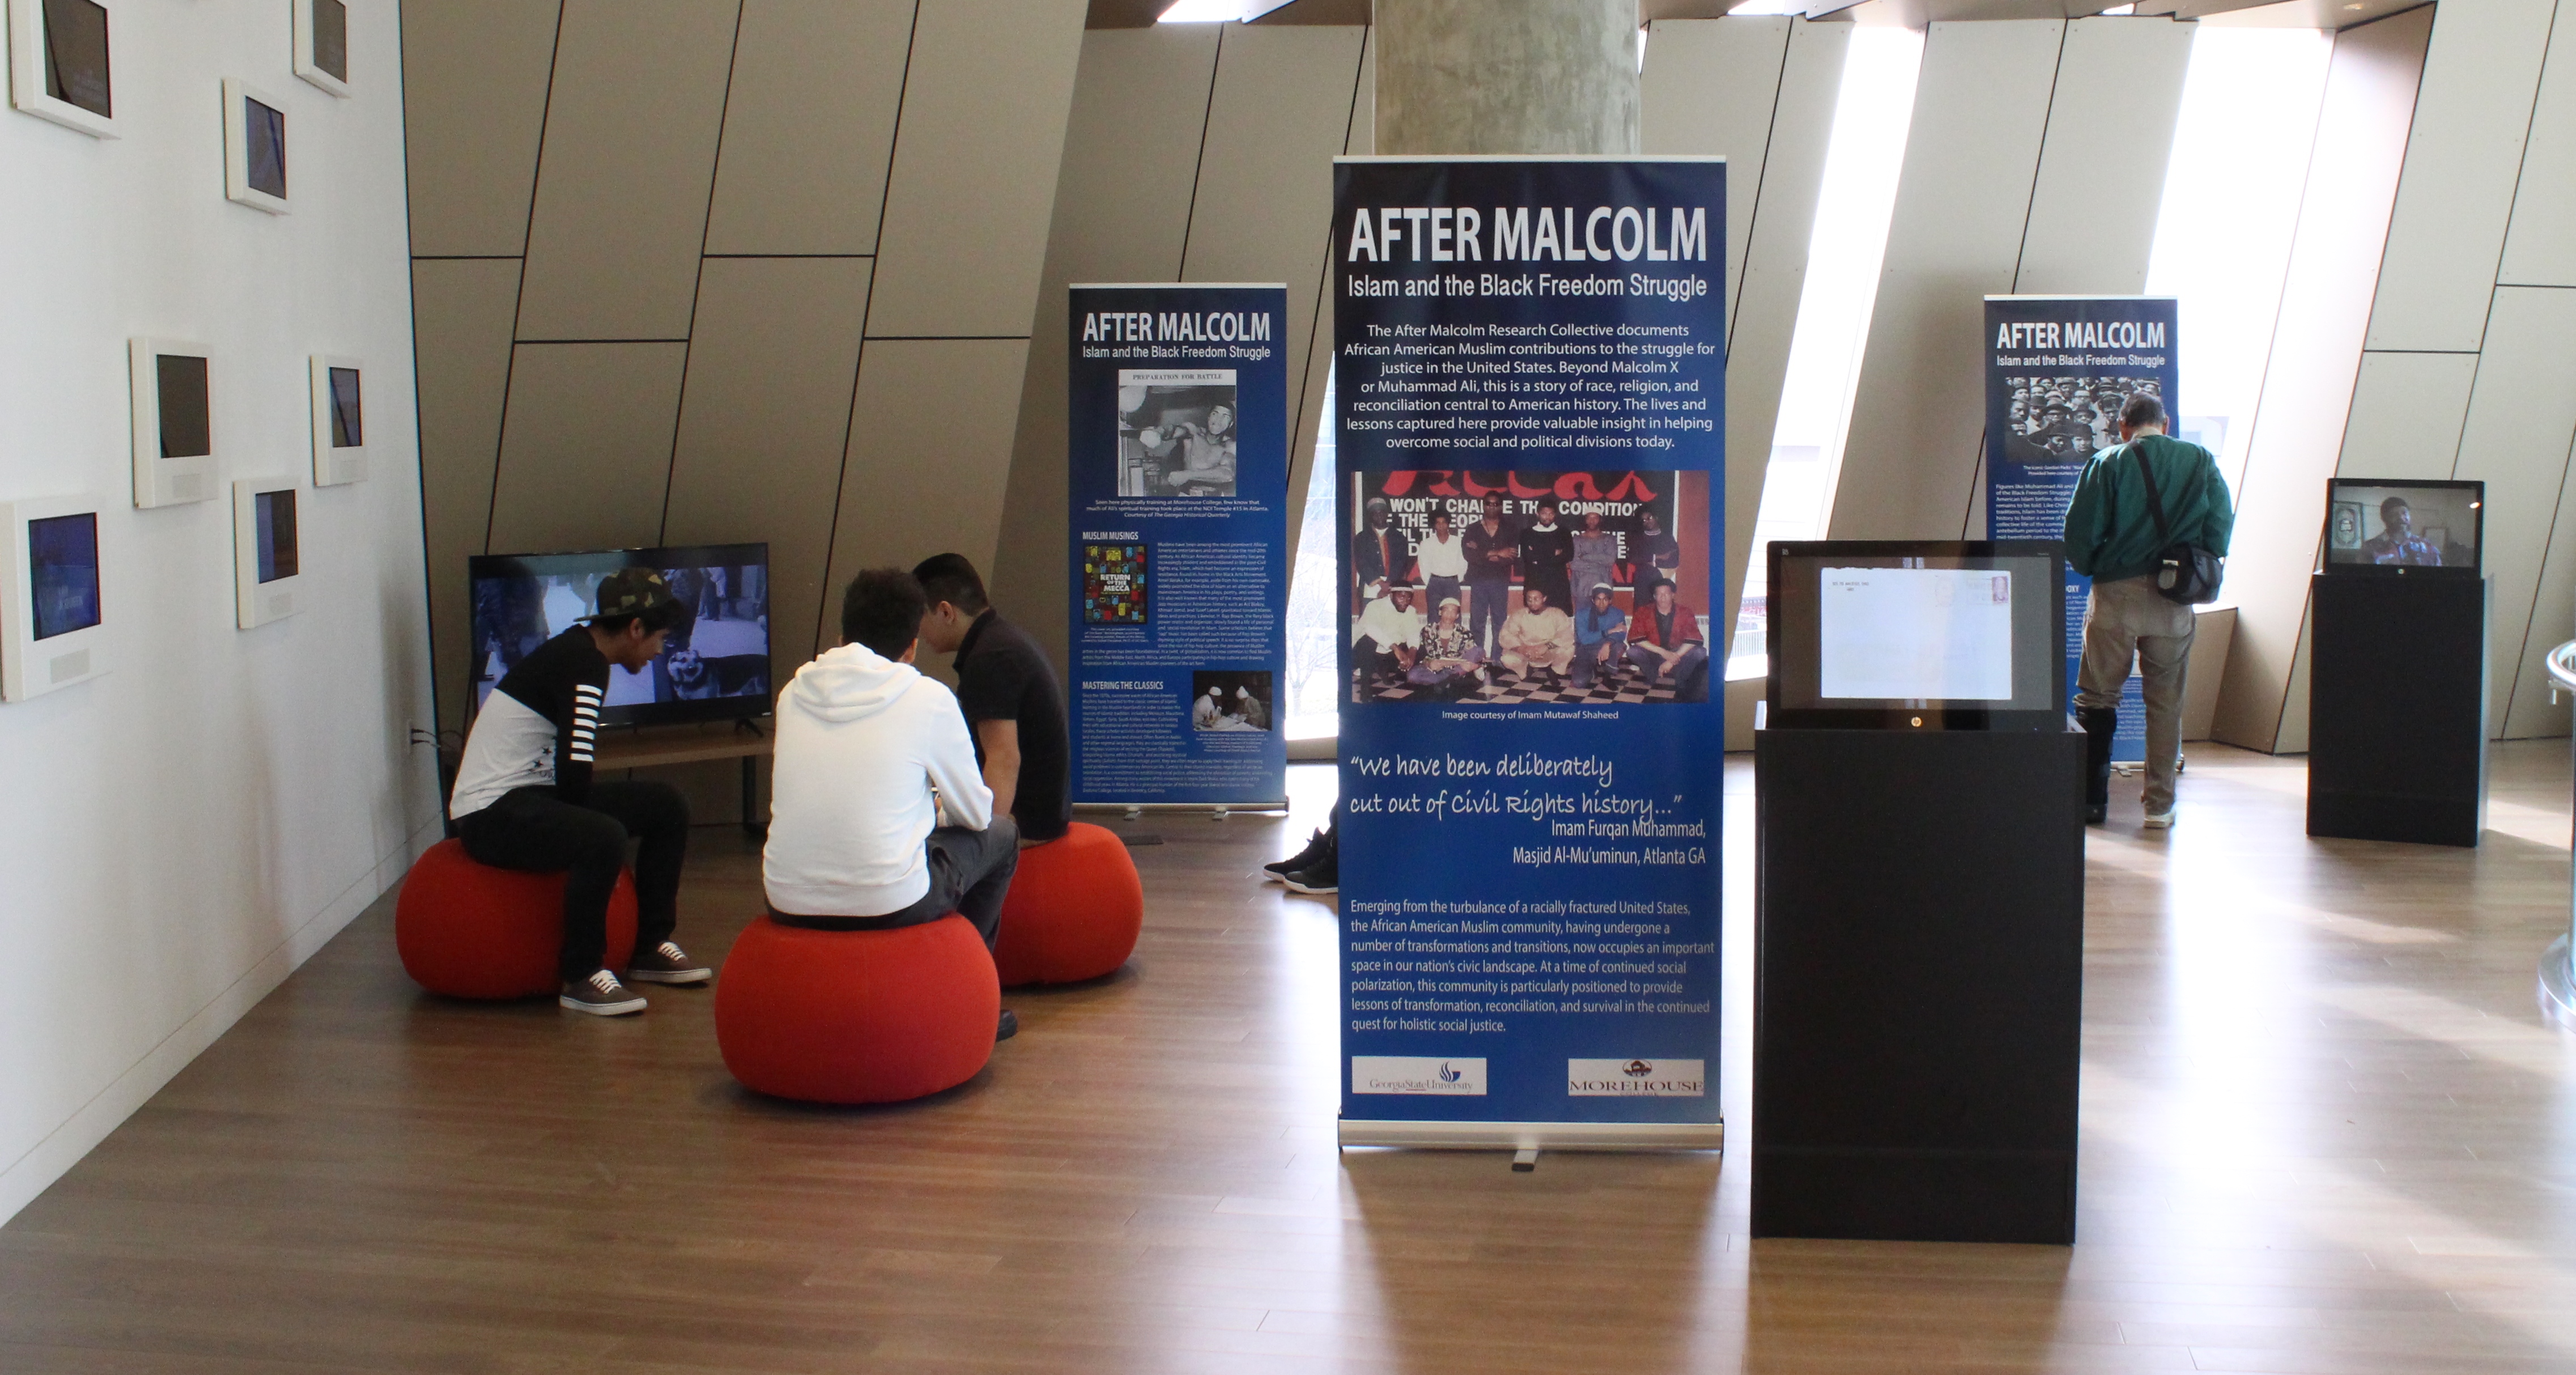 After Malcolm Project to Exhibit at National Civil and Human Rights Museum